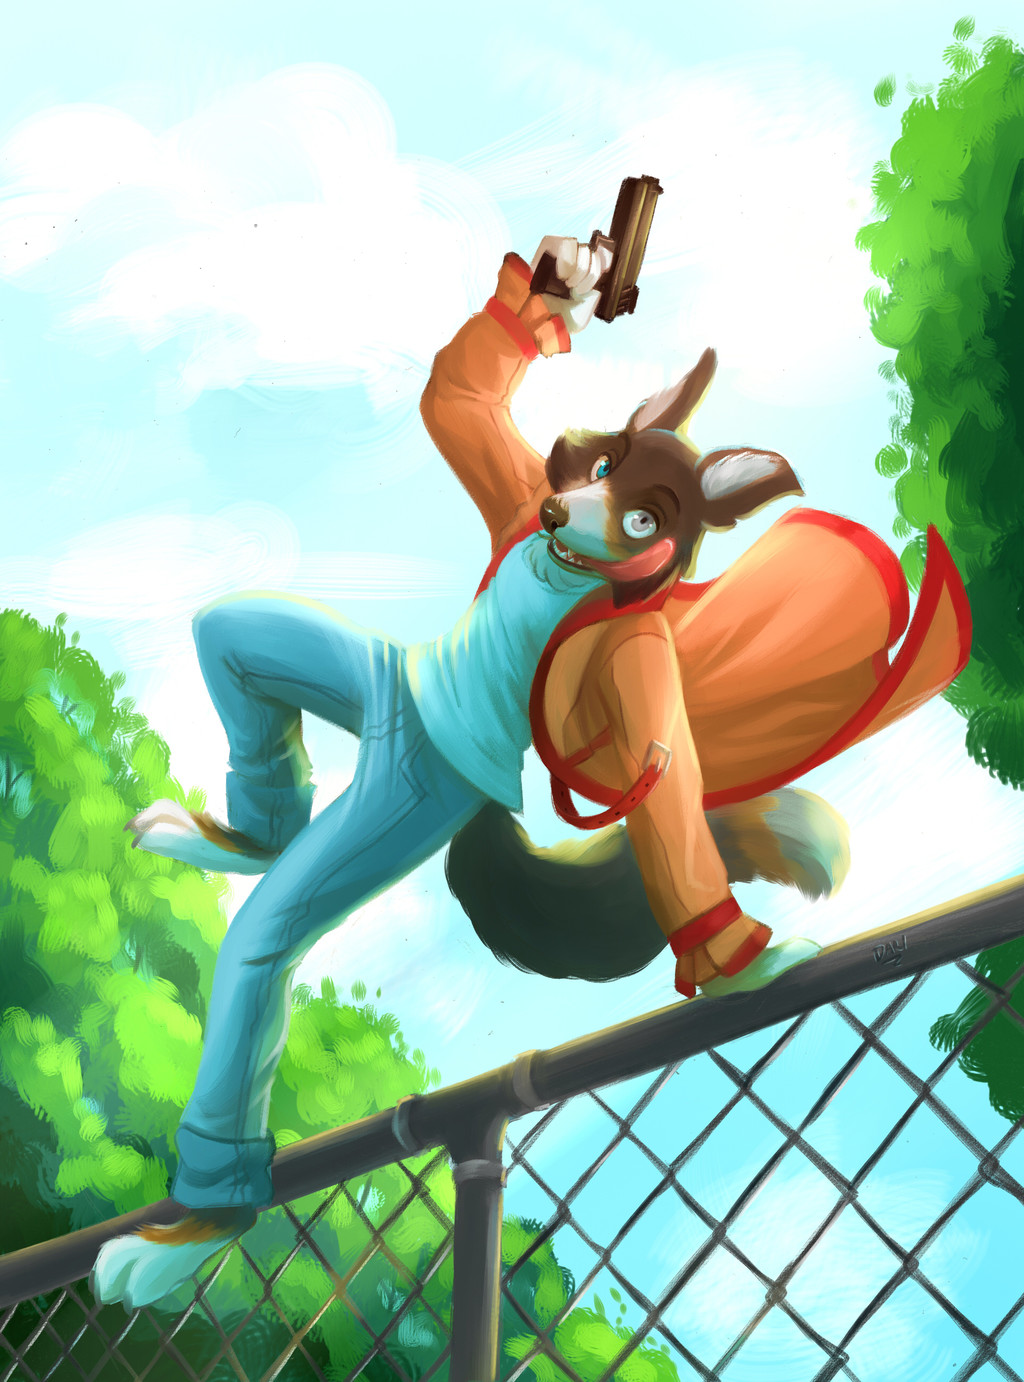 [Com] Over the Fence by Darshia